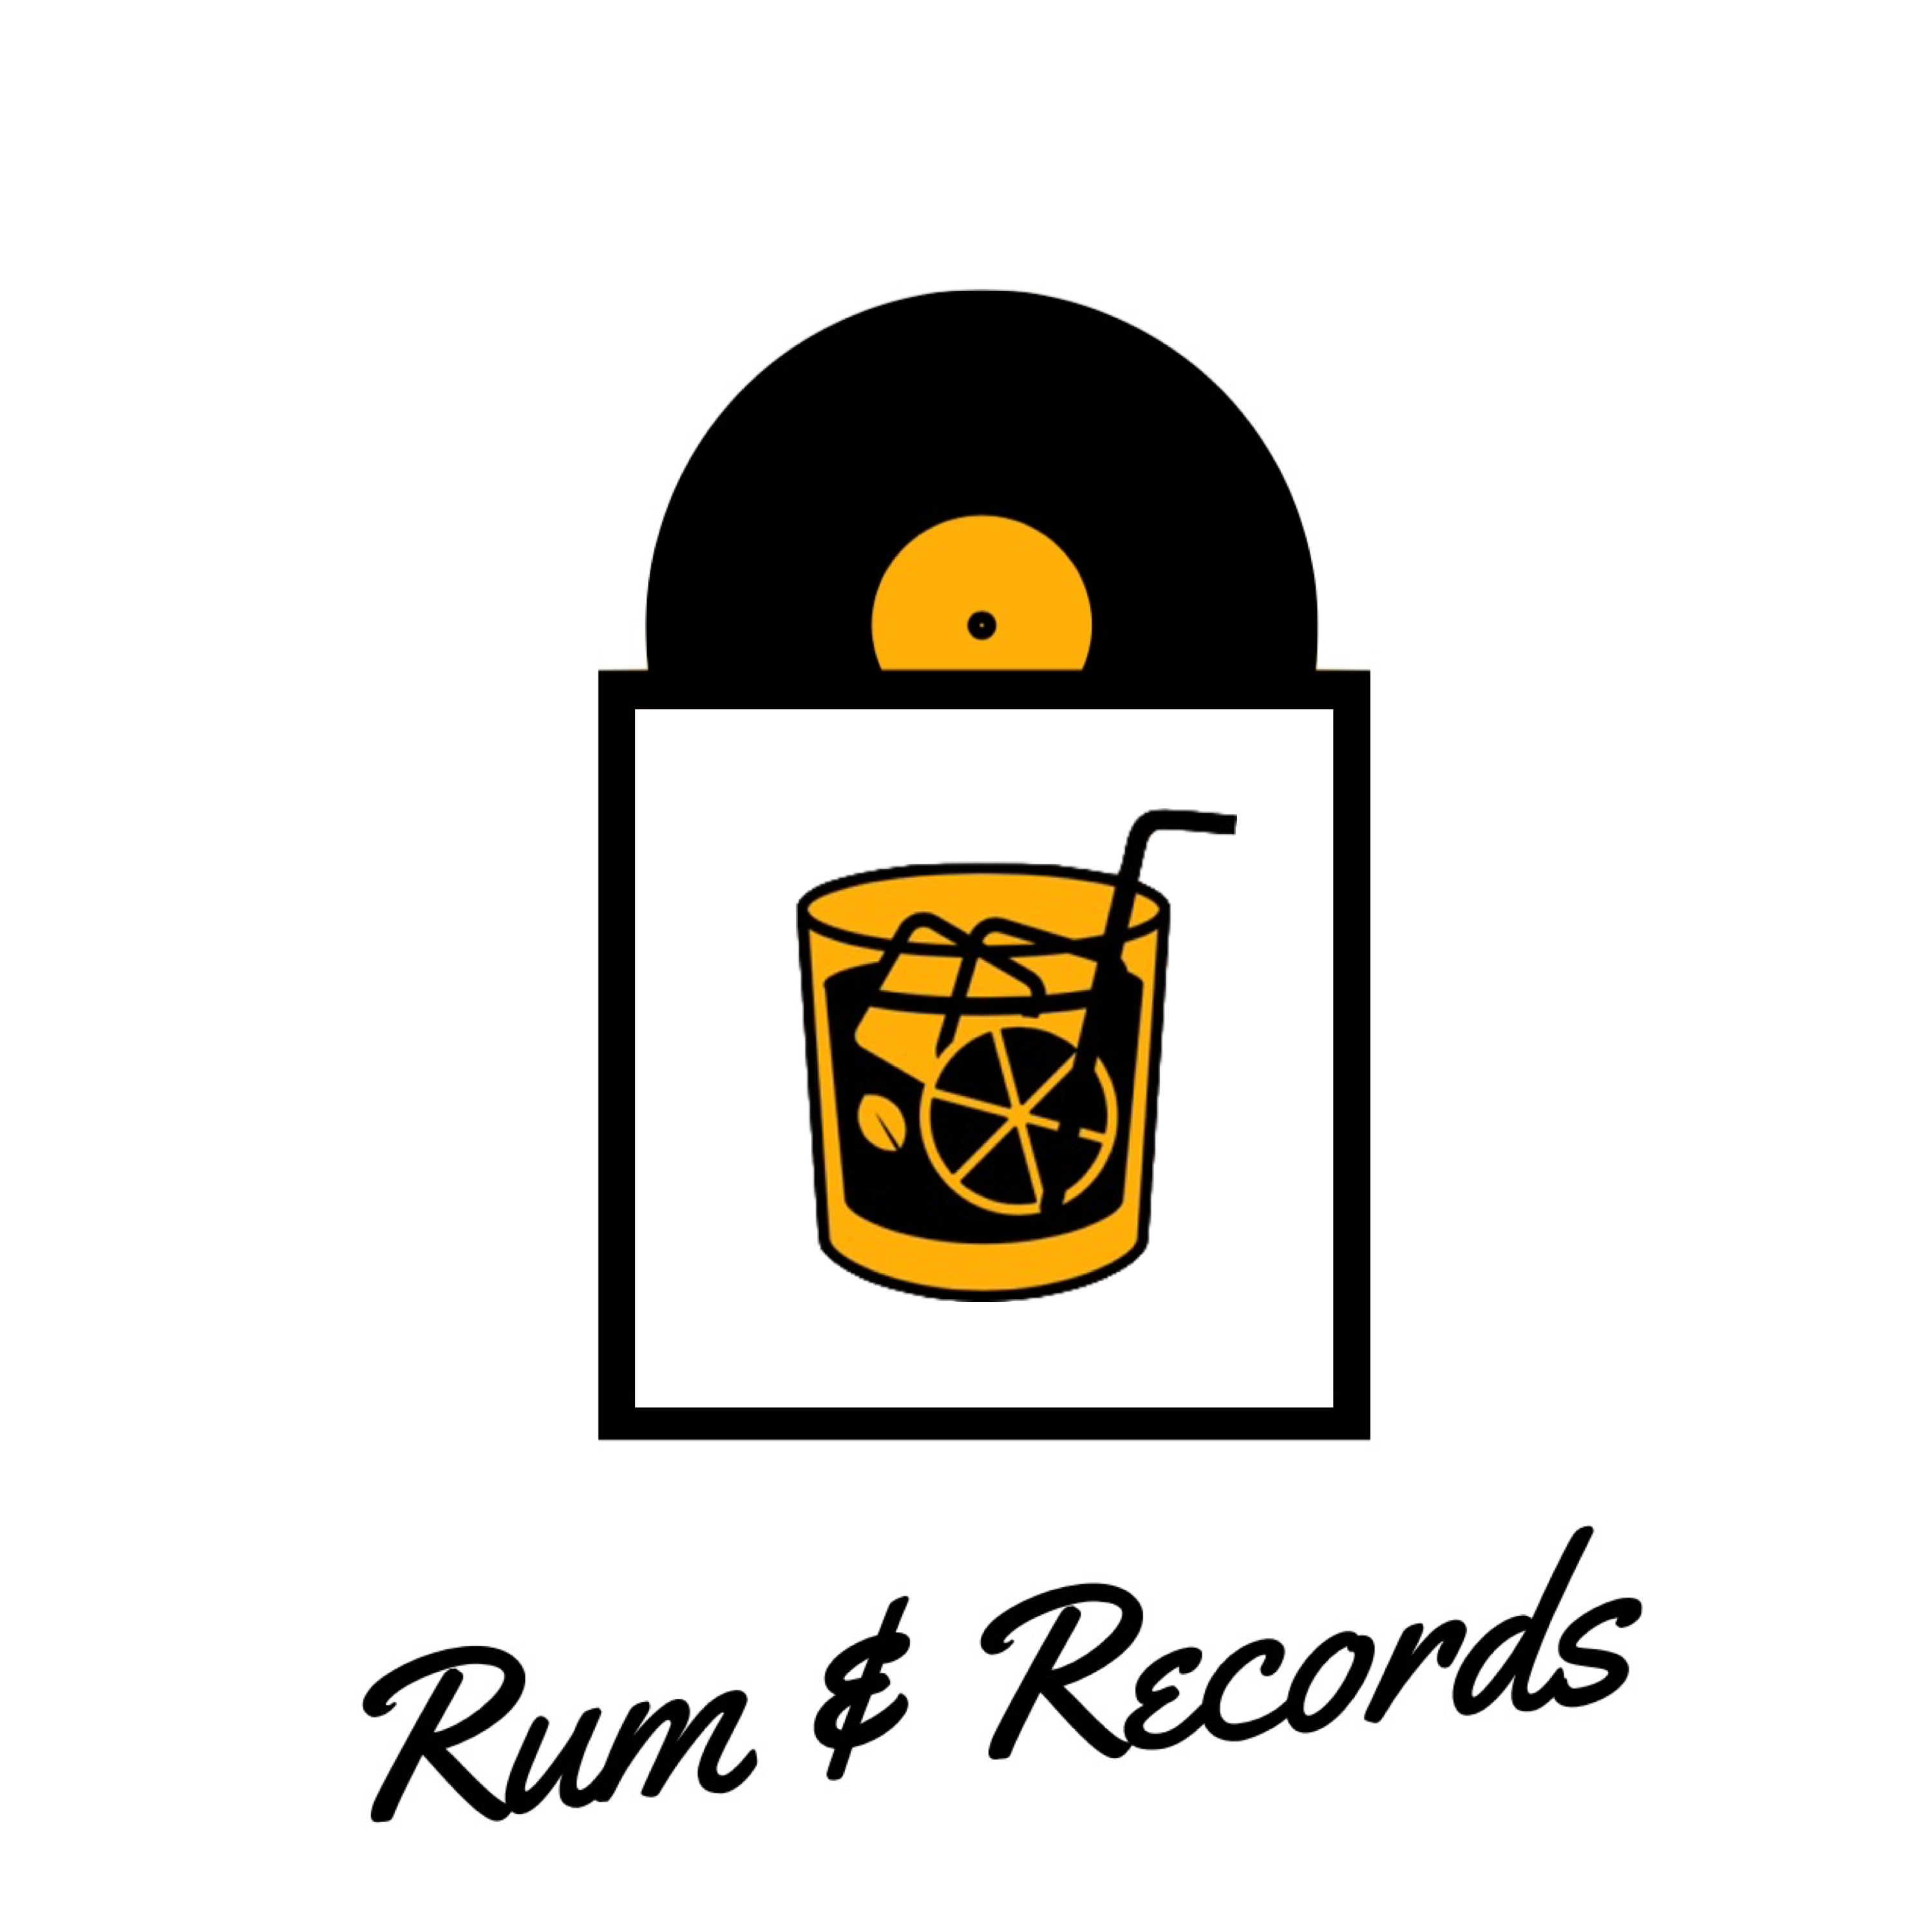 Rum & Records - The Archives